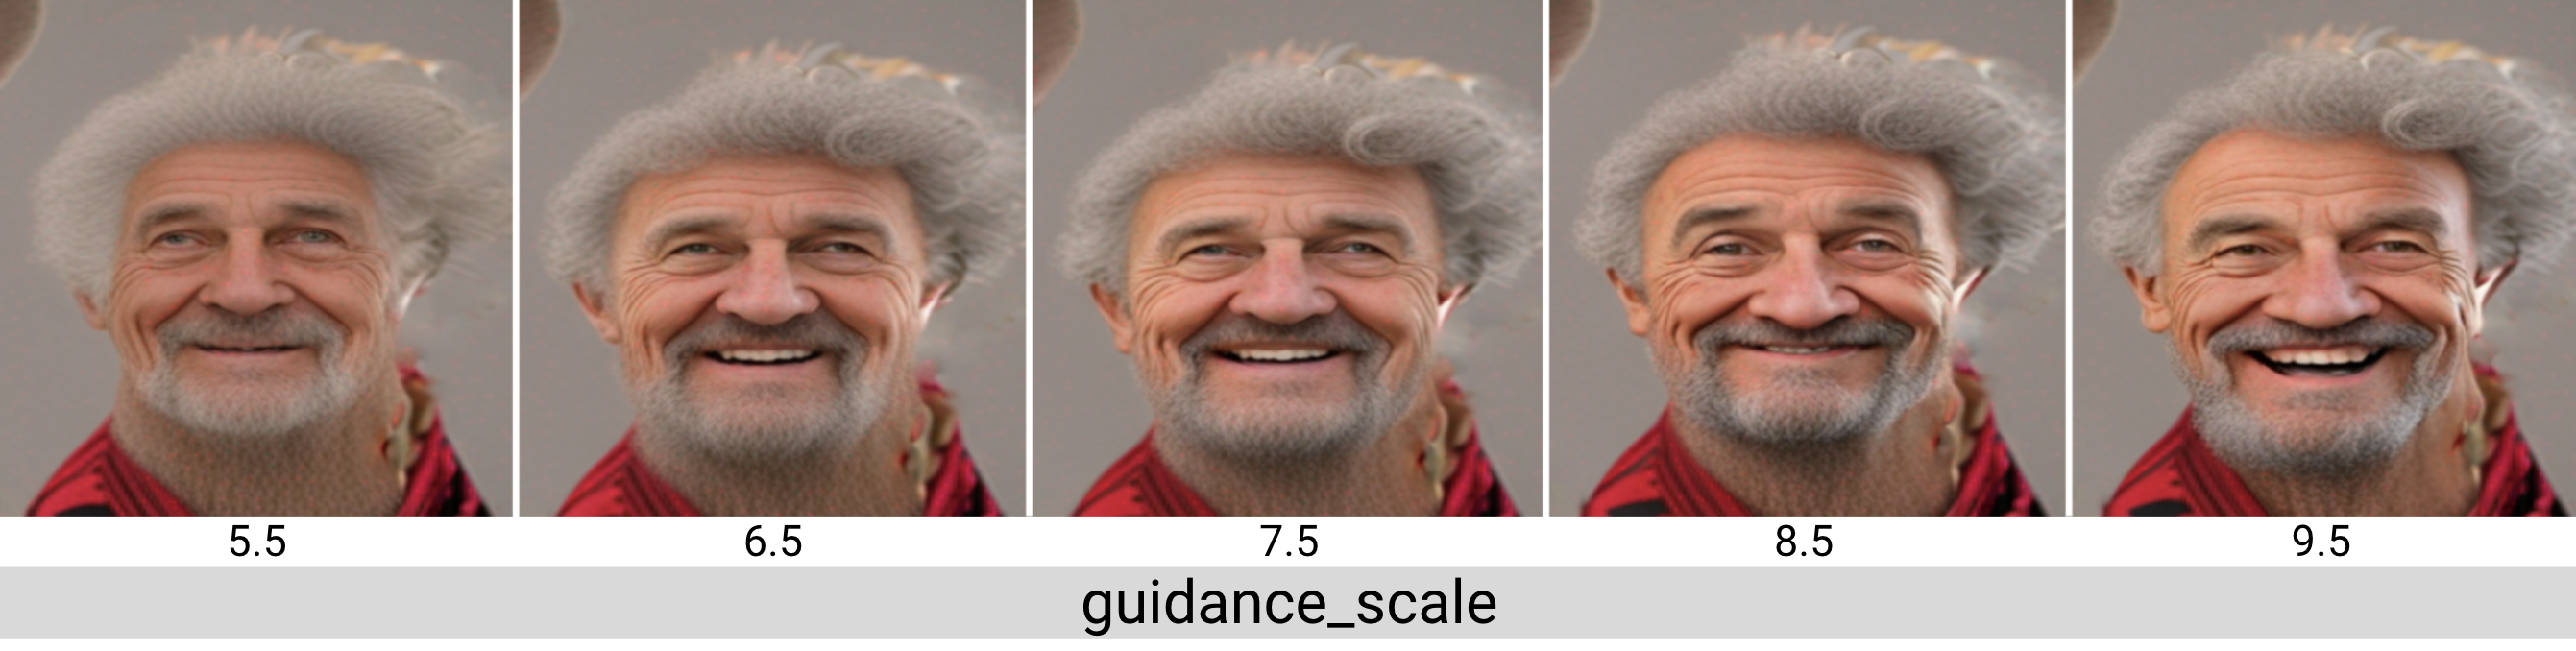 A picture of an old man with curly gray hair, on the left, slightly happy, becoming happier as you move right and the guidance scale increases.